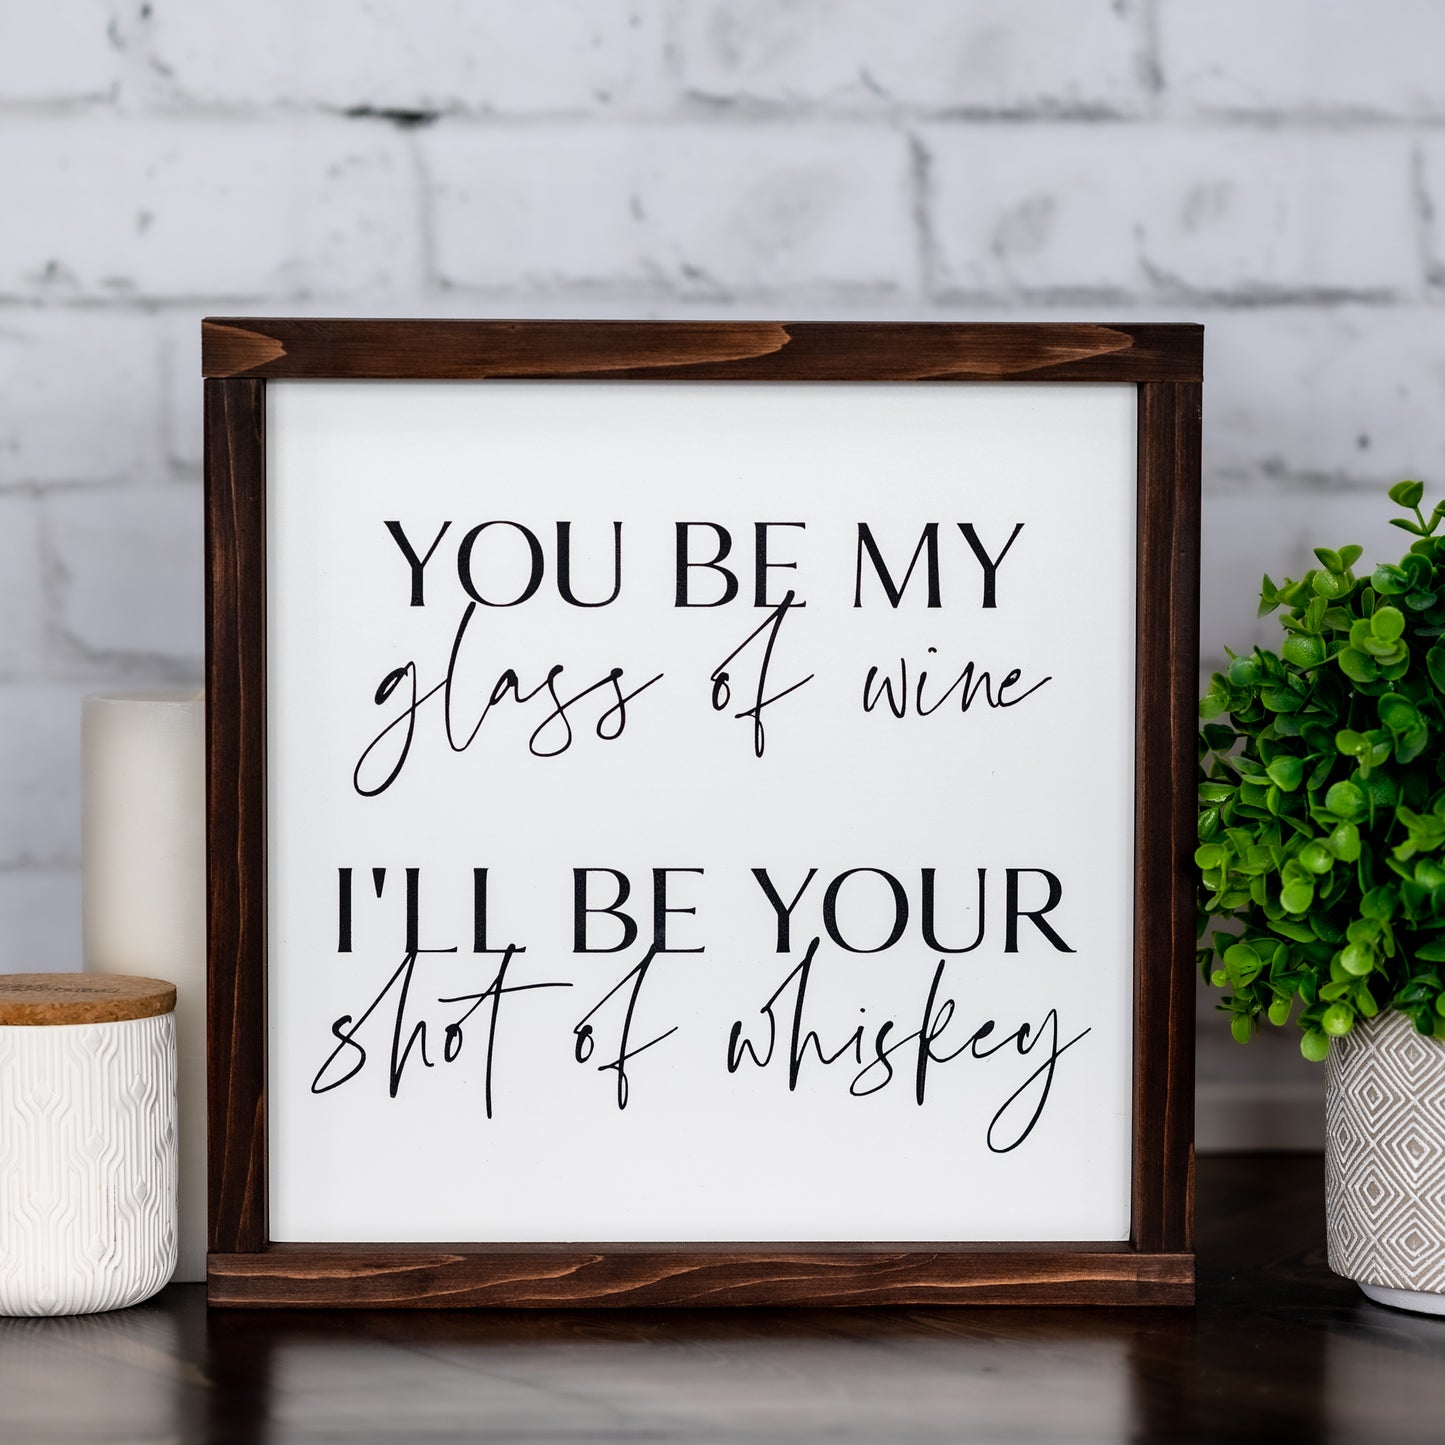 you be my glass of wine i'll be your shot of whiskey  ~ wood sign